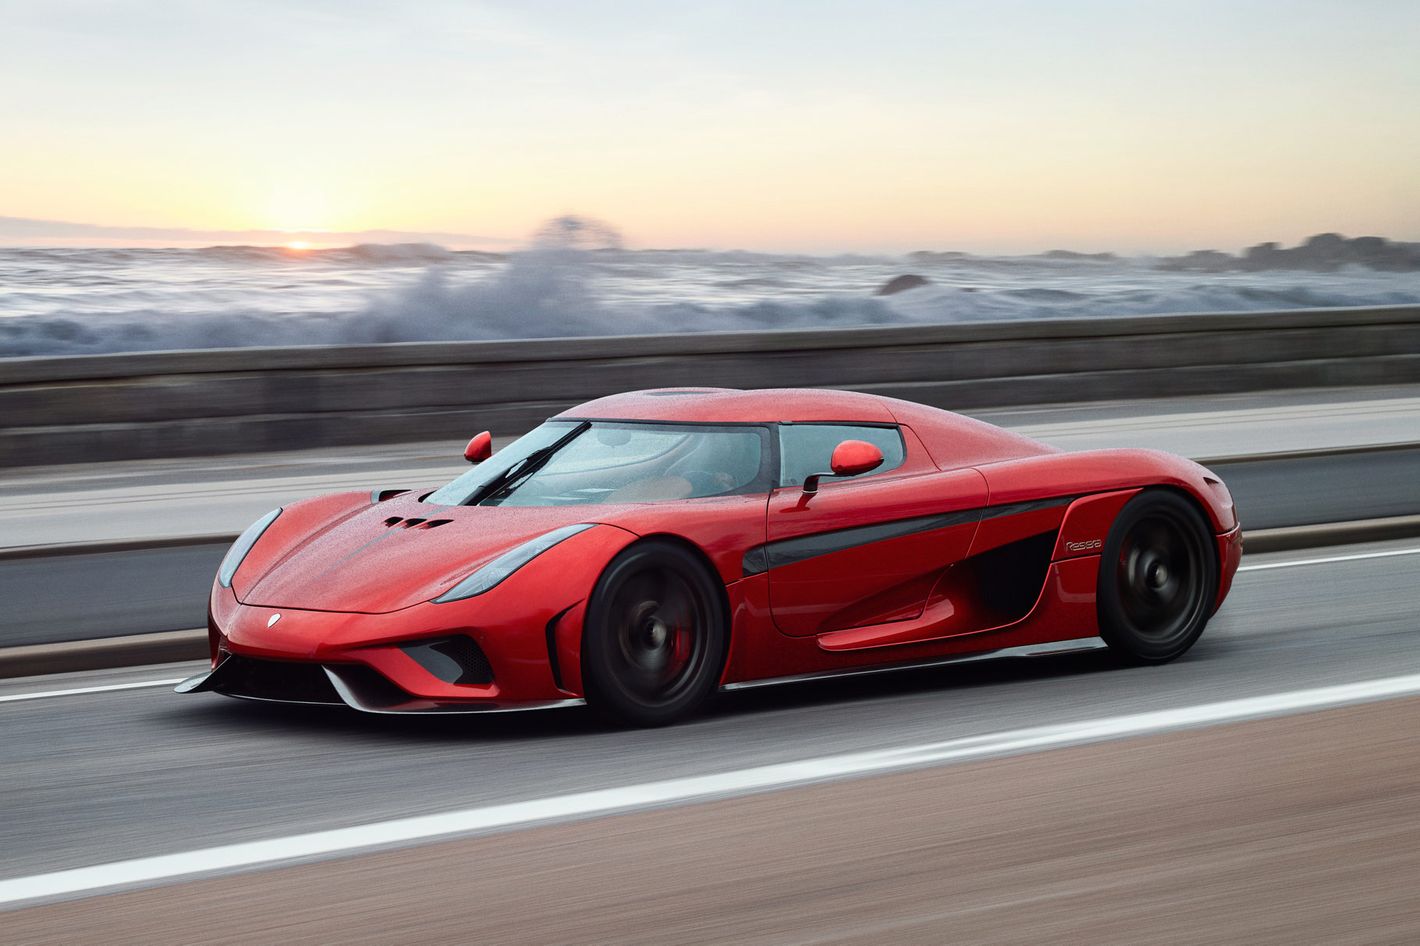 The fastest cars accelerating from 0-100 km/h: The rankings